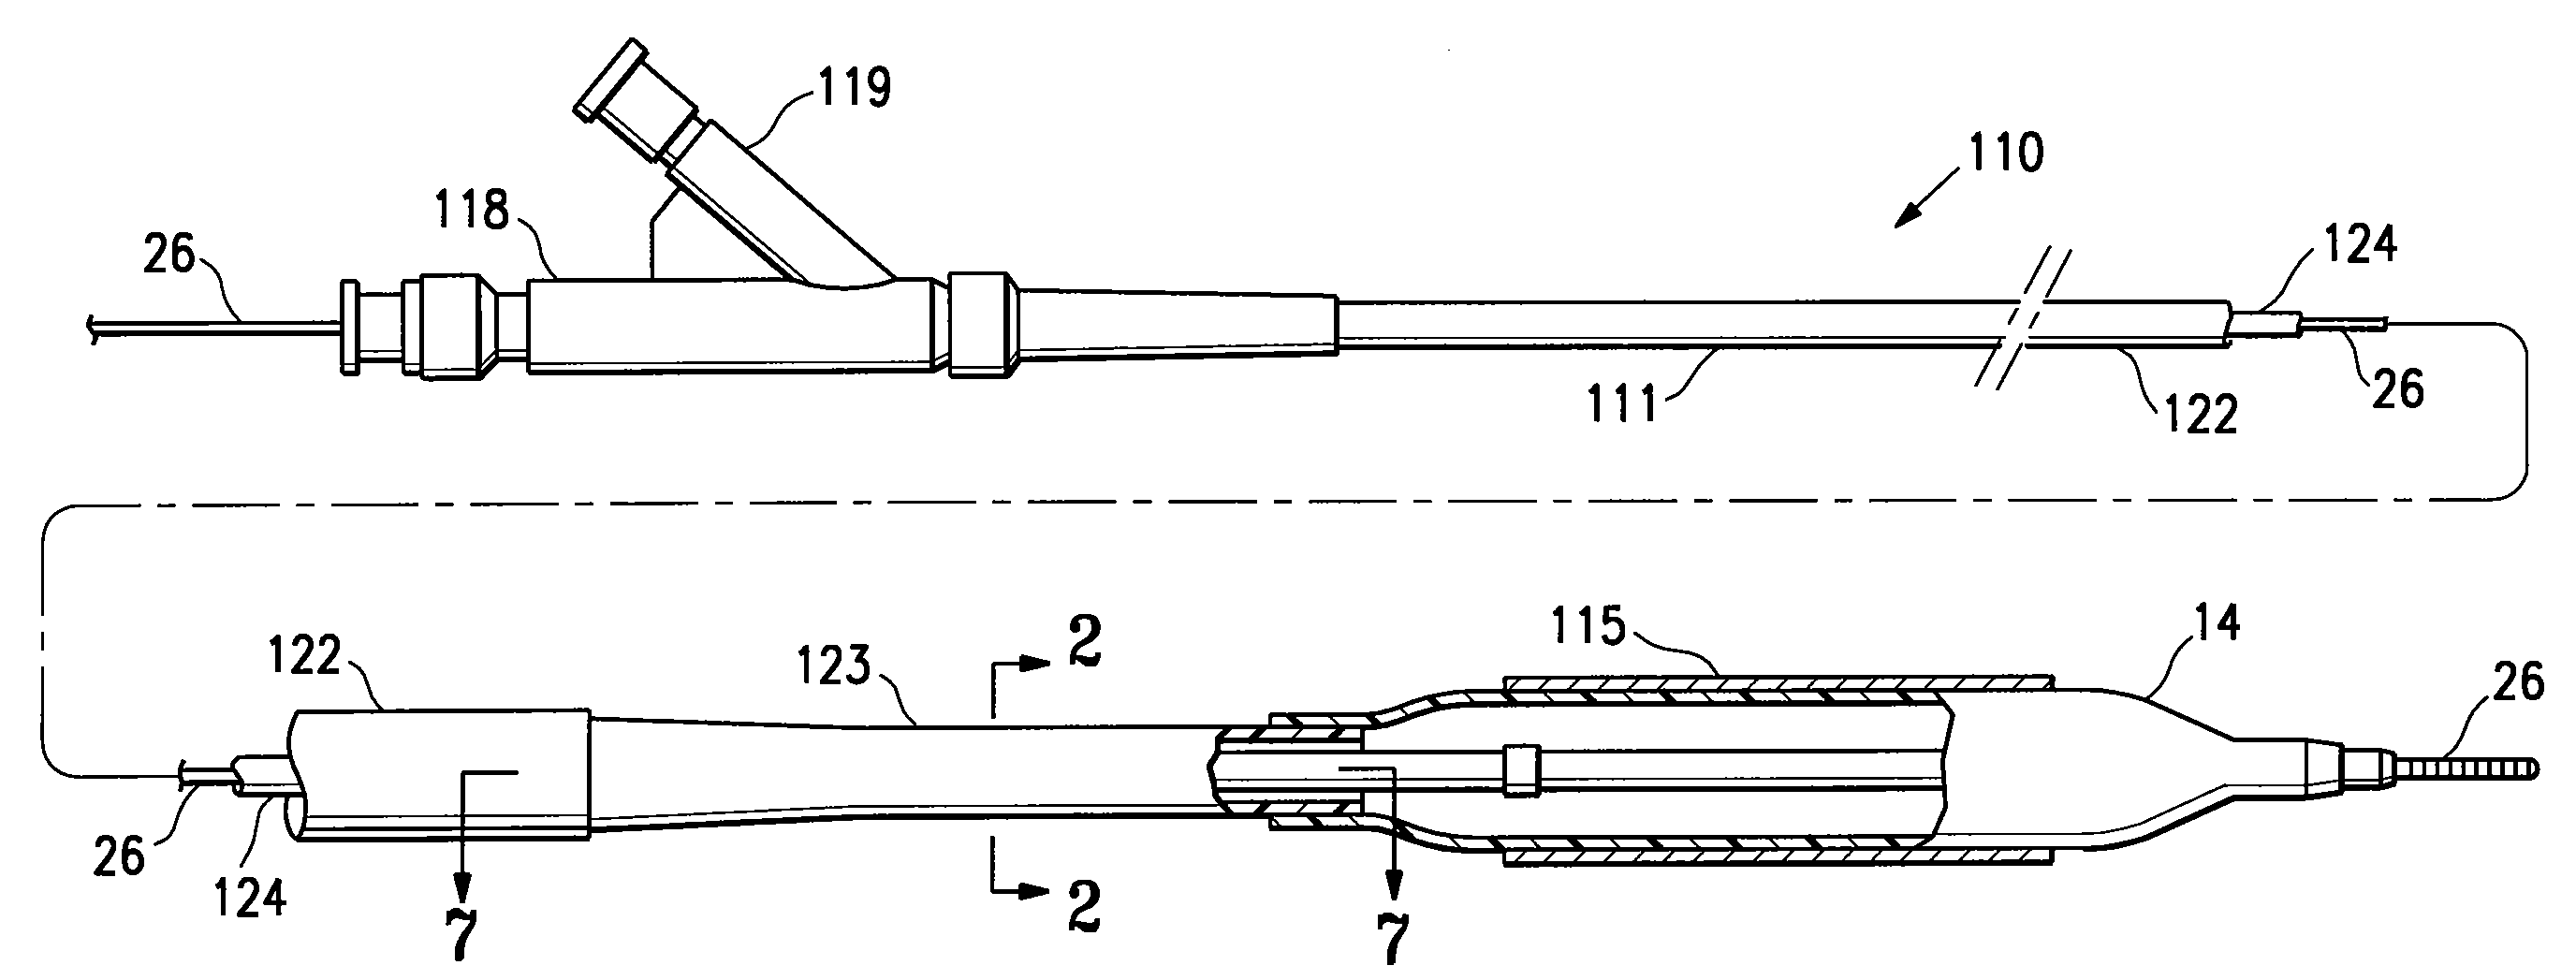 Balloon catheter tapered shaft having high strength and flexibility and method of making same